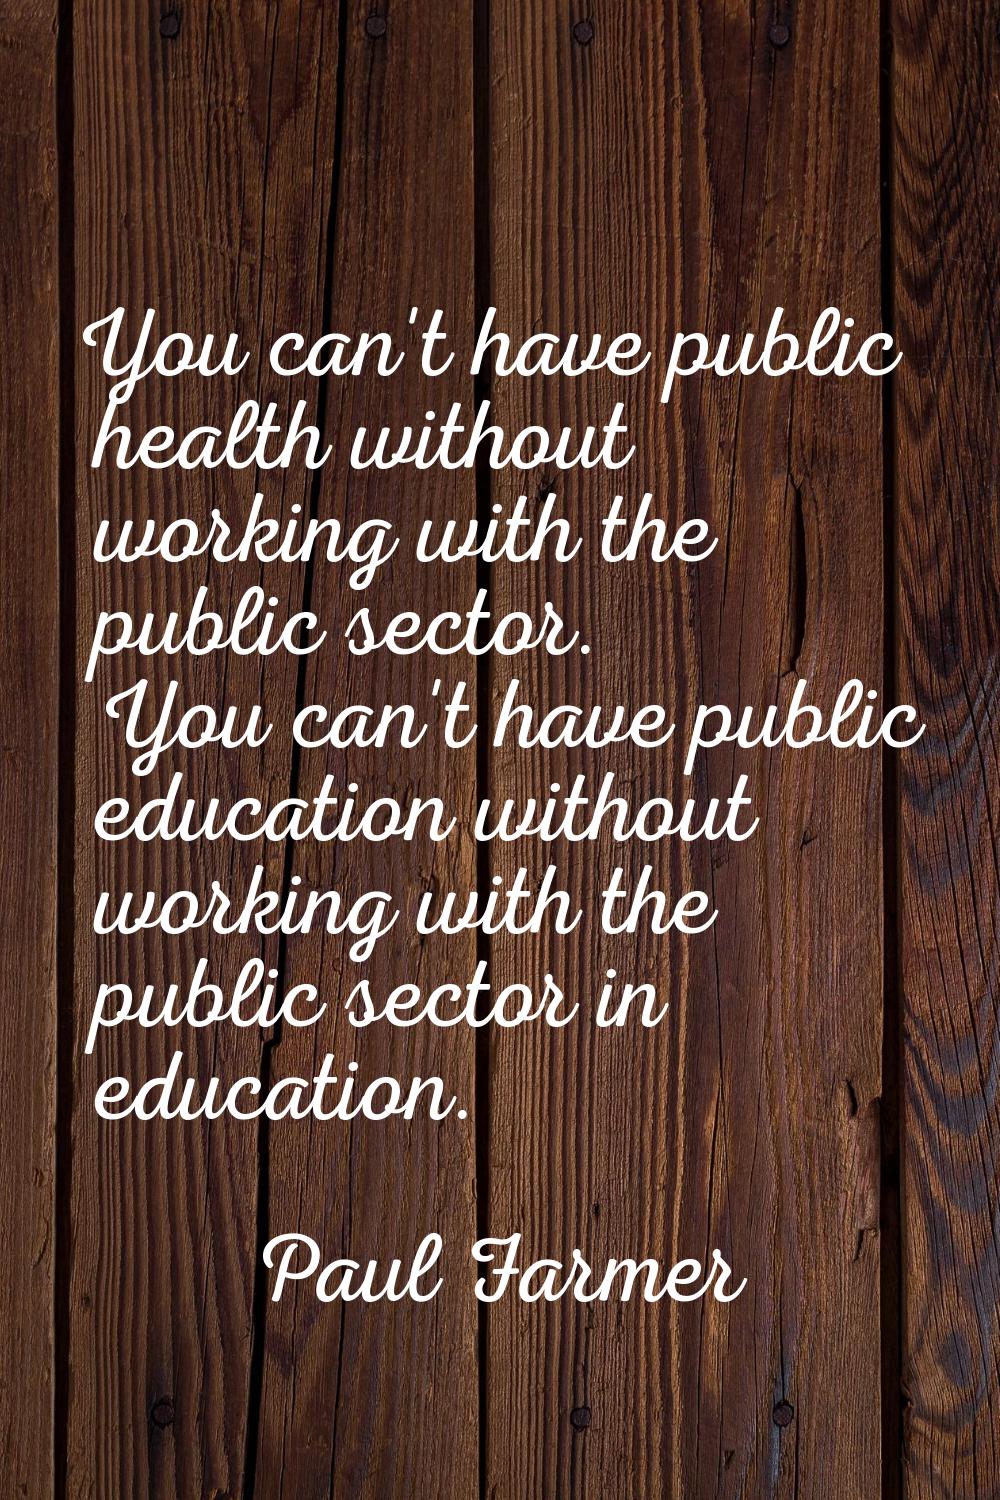 You can't have public health without working with the public sector. You can't have public educatio